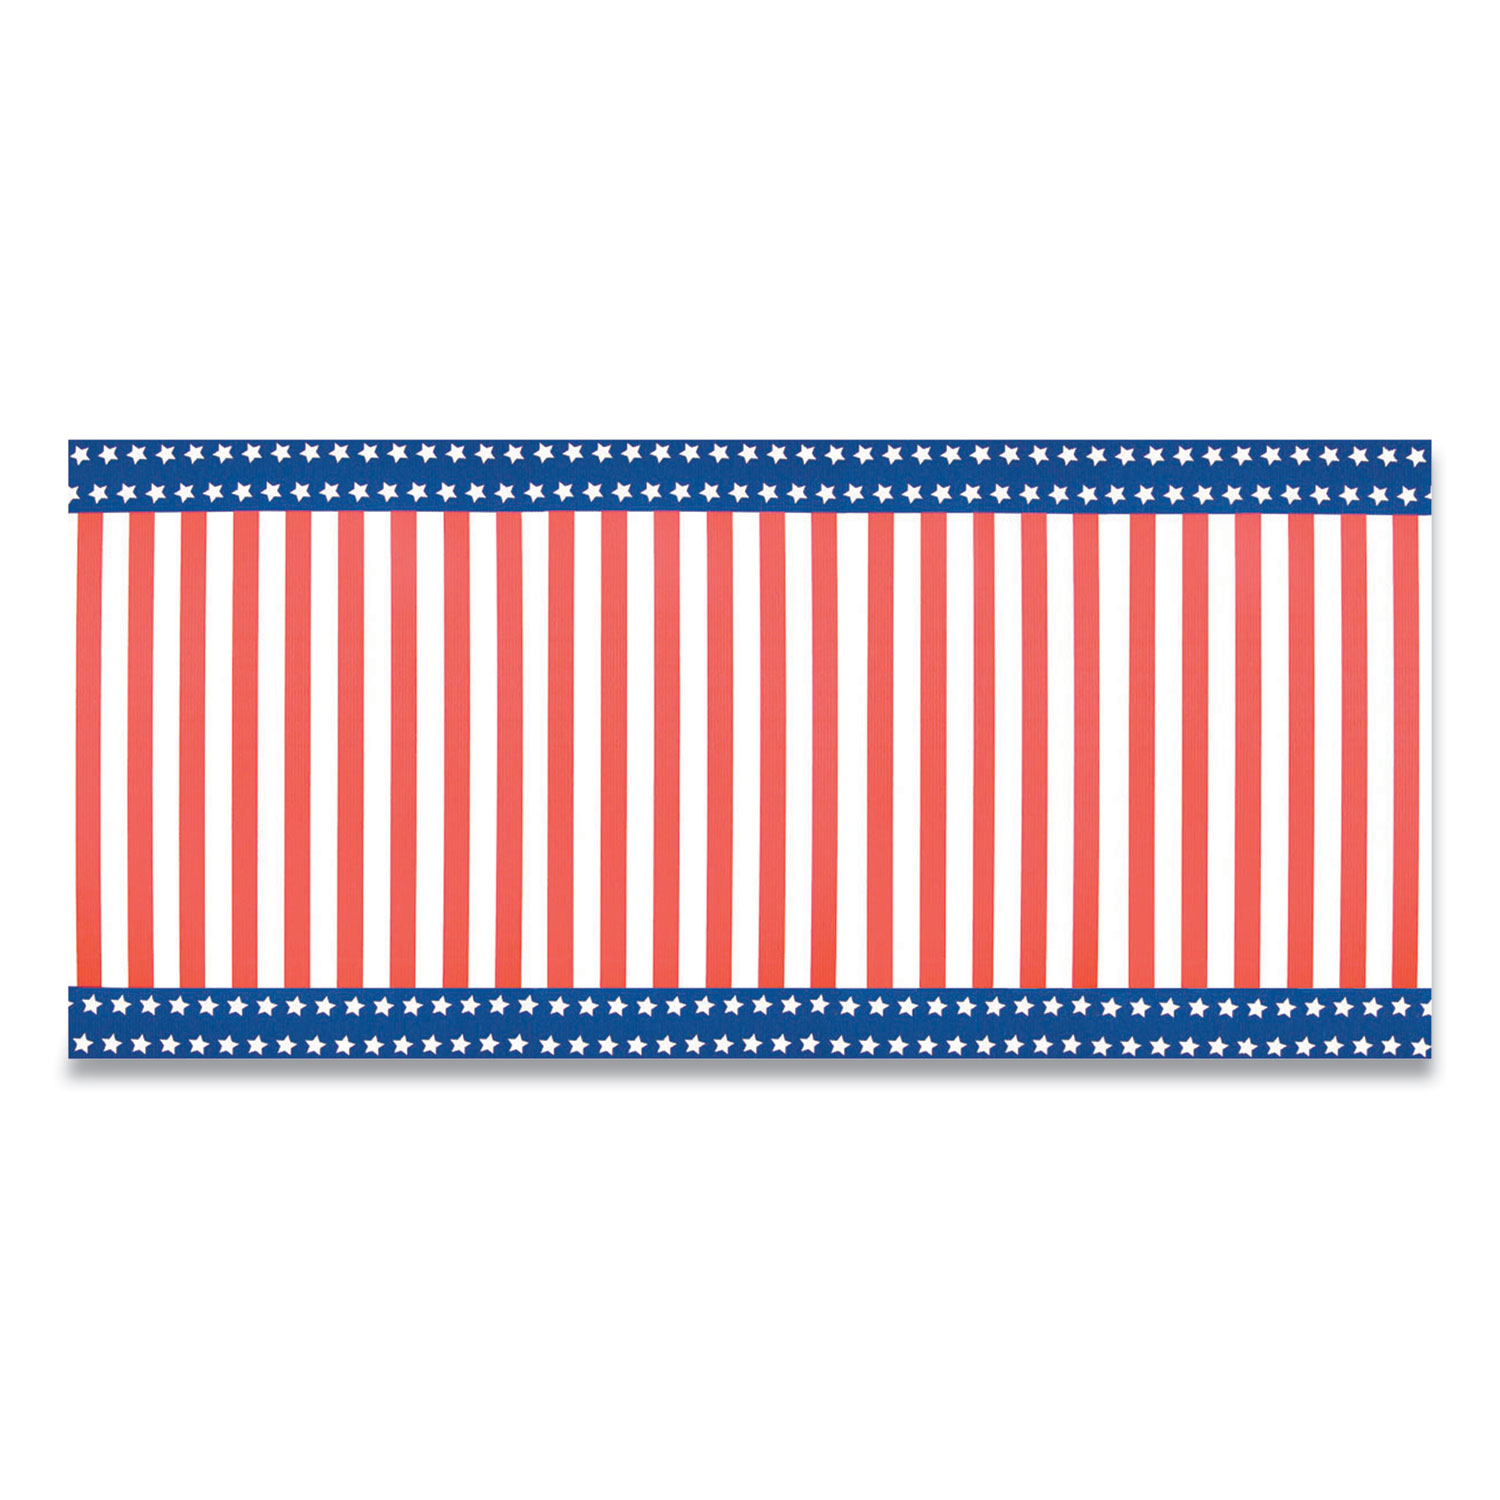 Pacon® Corobuff Corrugated Paper Roll, 48 x 25 ft, Stars and Stripes